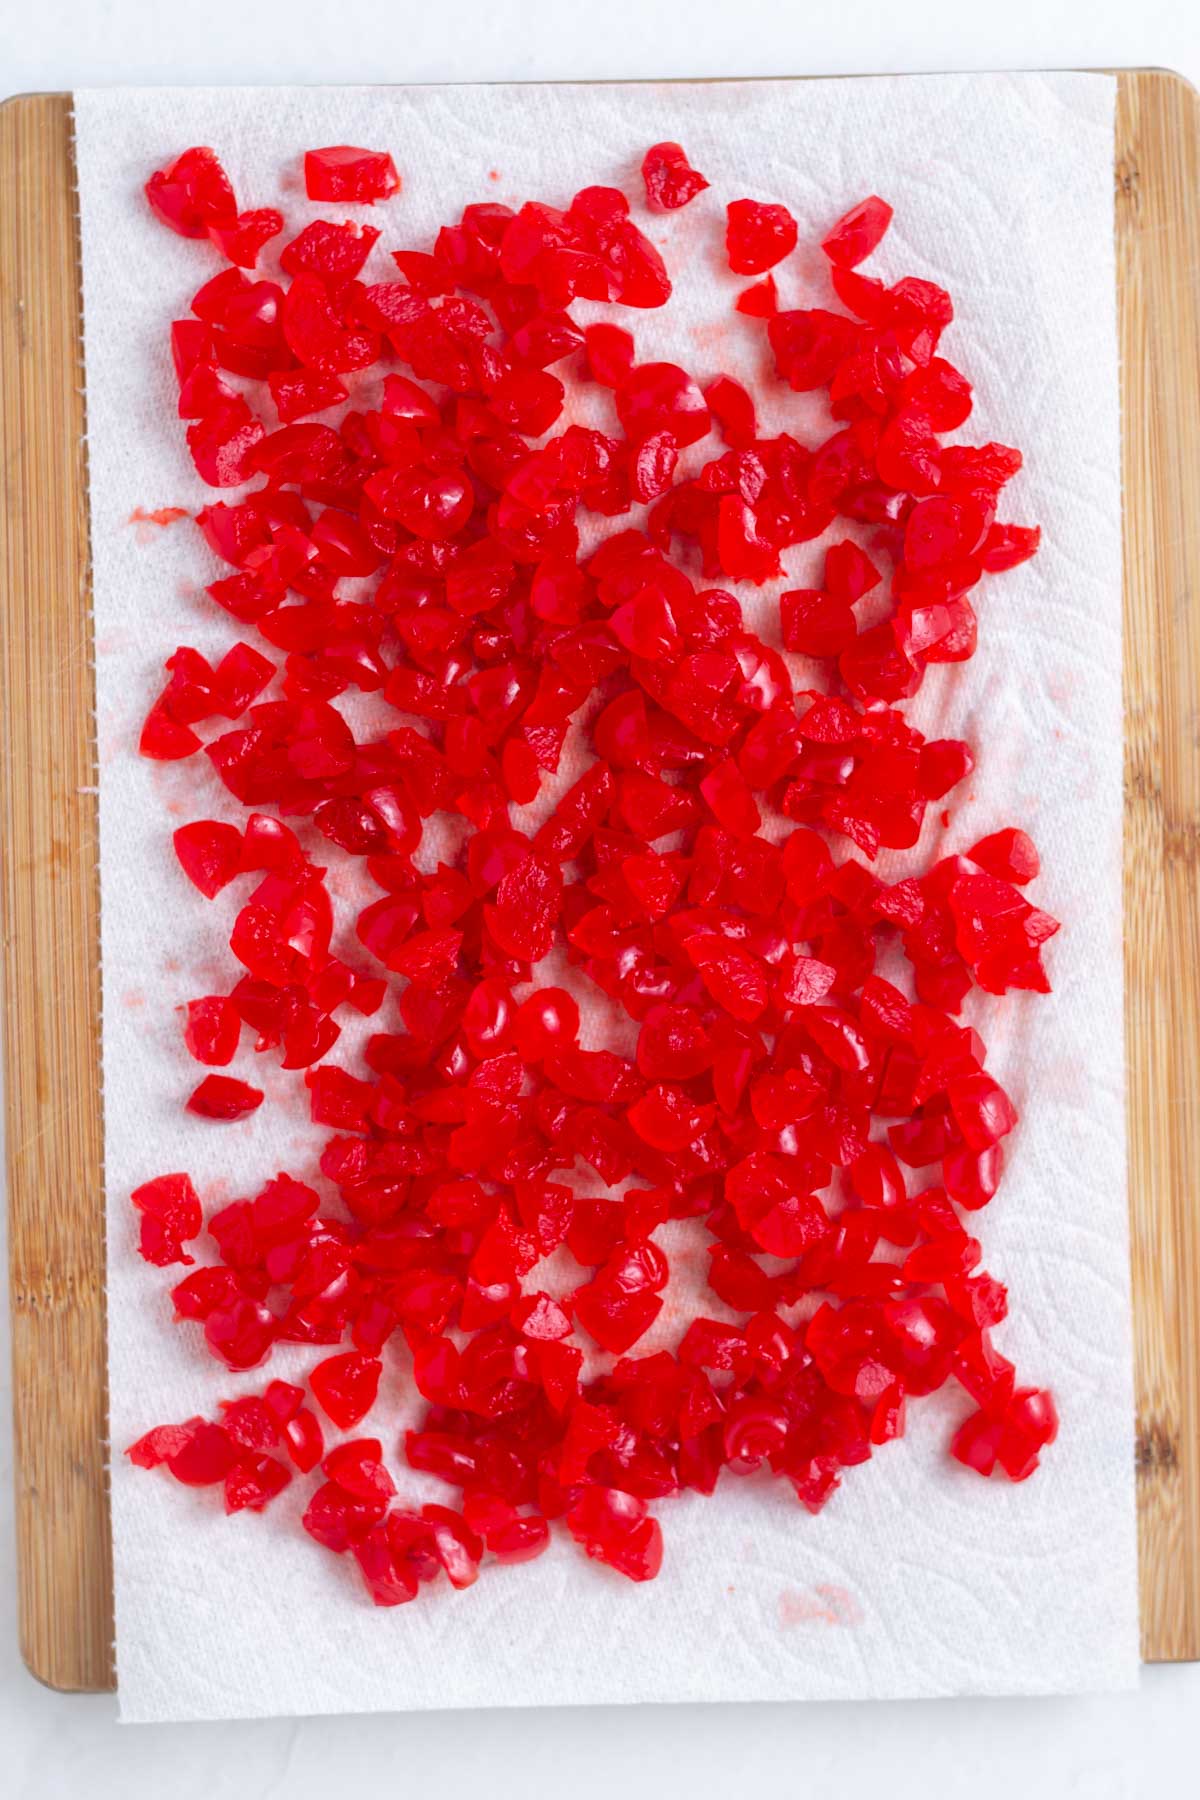 Chopped maraschino cherries on a paper towel lined cutting board.